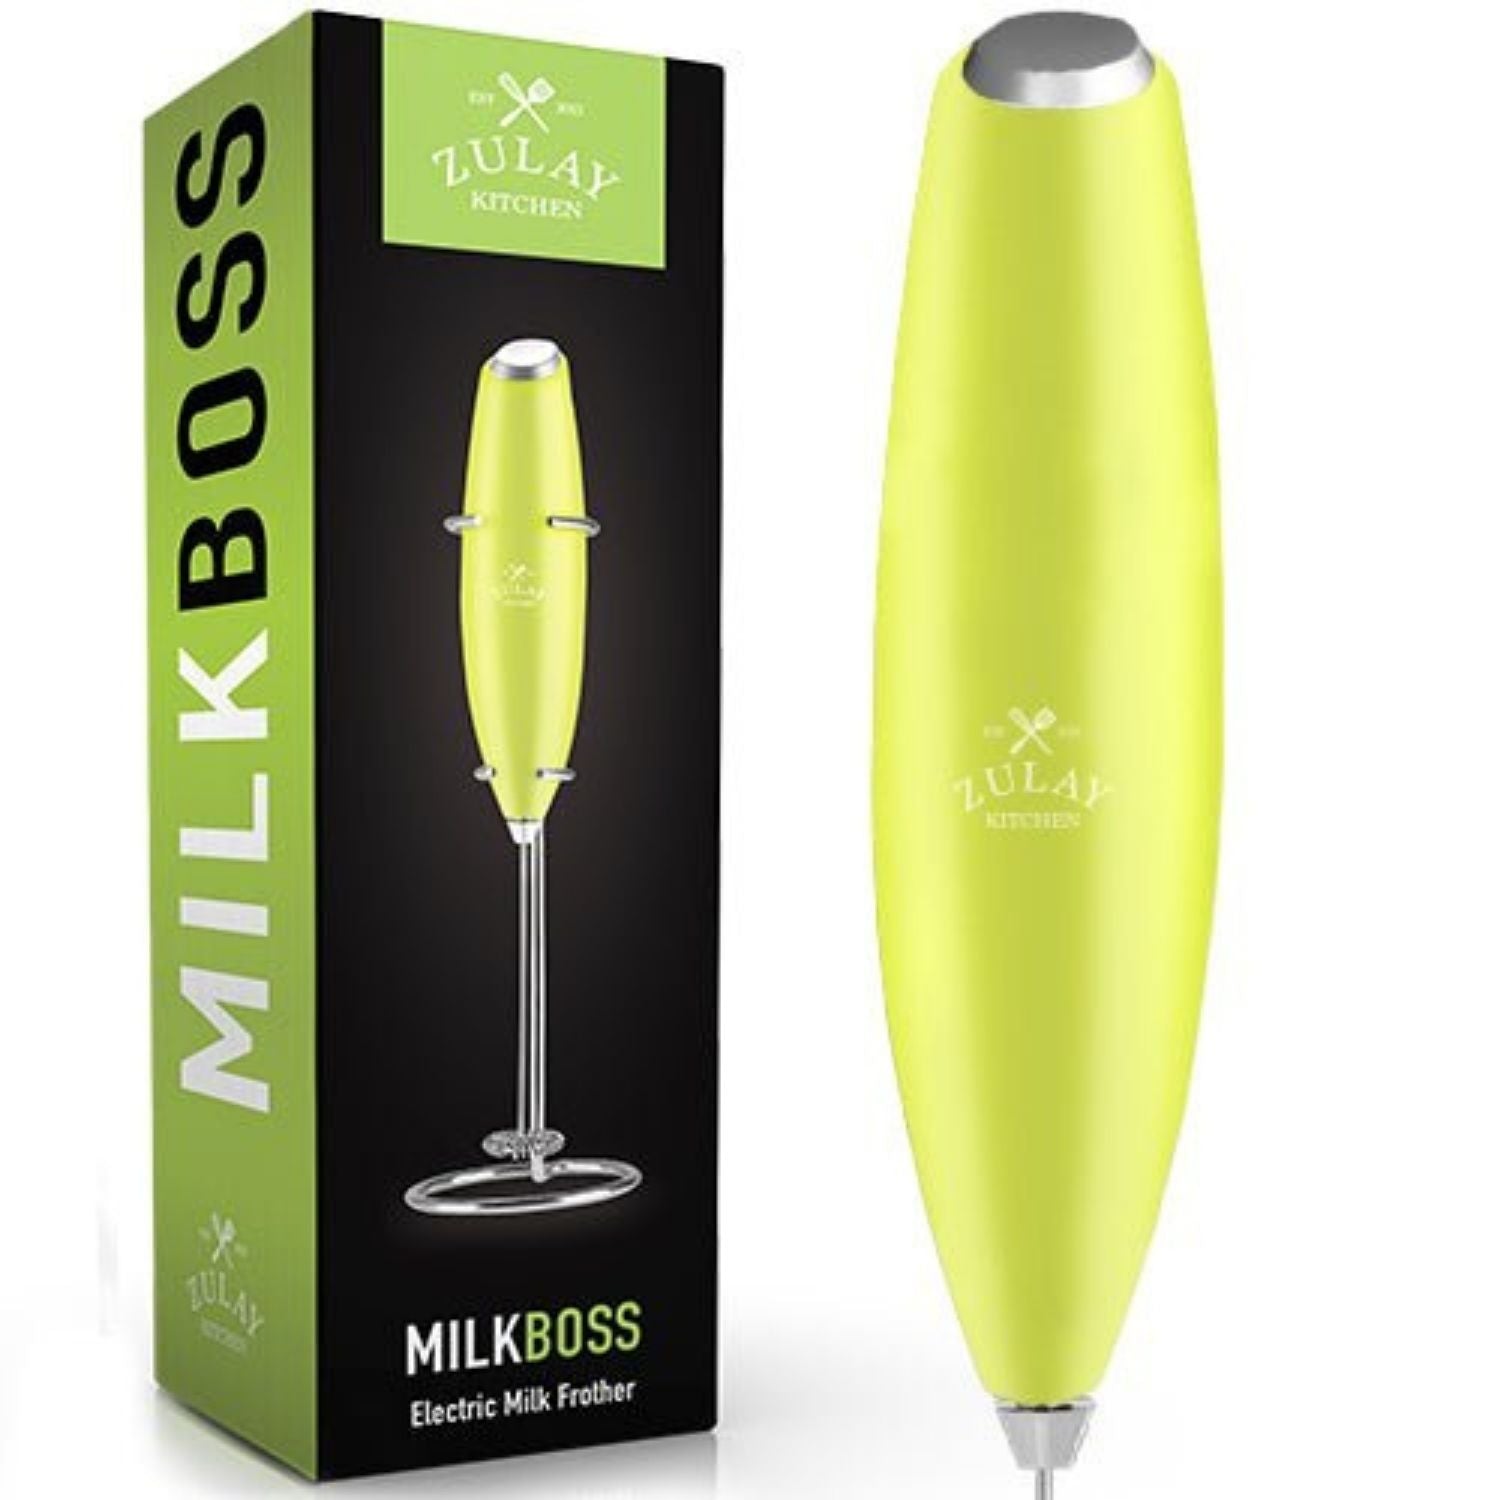 Zulay Kitchen - Milk Boss Electric Milk Frother 